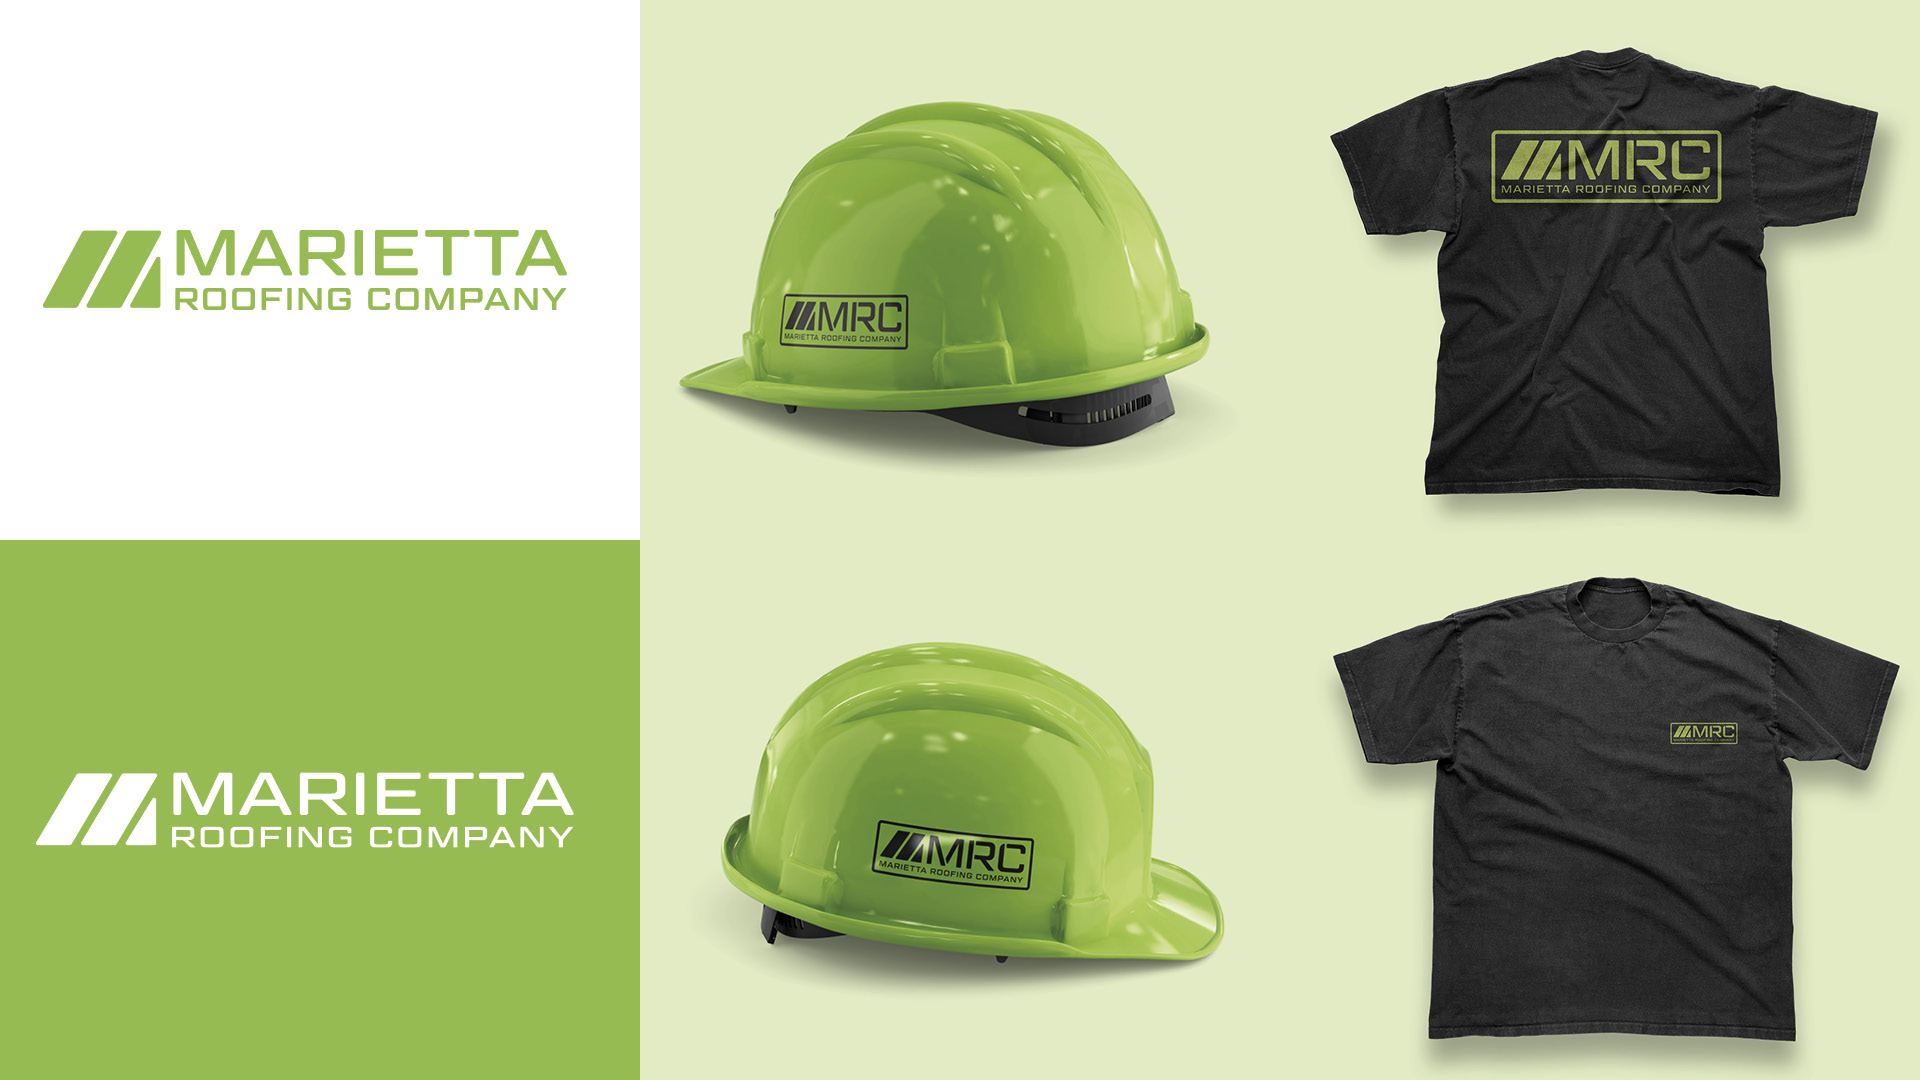  / “Marietta Roofing,” logo and apparel, 2021. Logo and apparel made for Marietta Roofing Company, based in Marietta, Ga. They wanted to rebrand themselves as a company with integrity and excellence. 